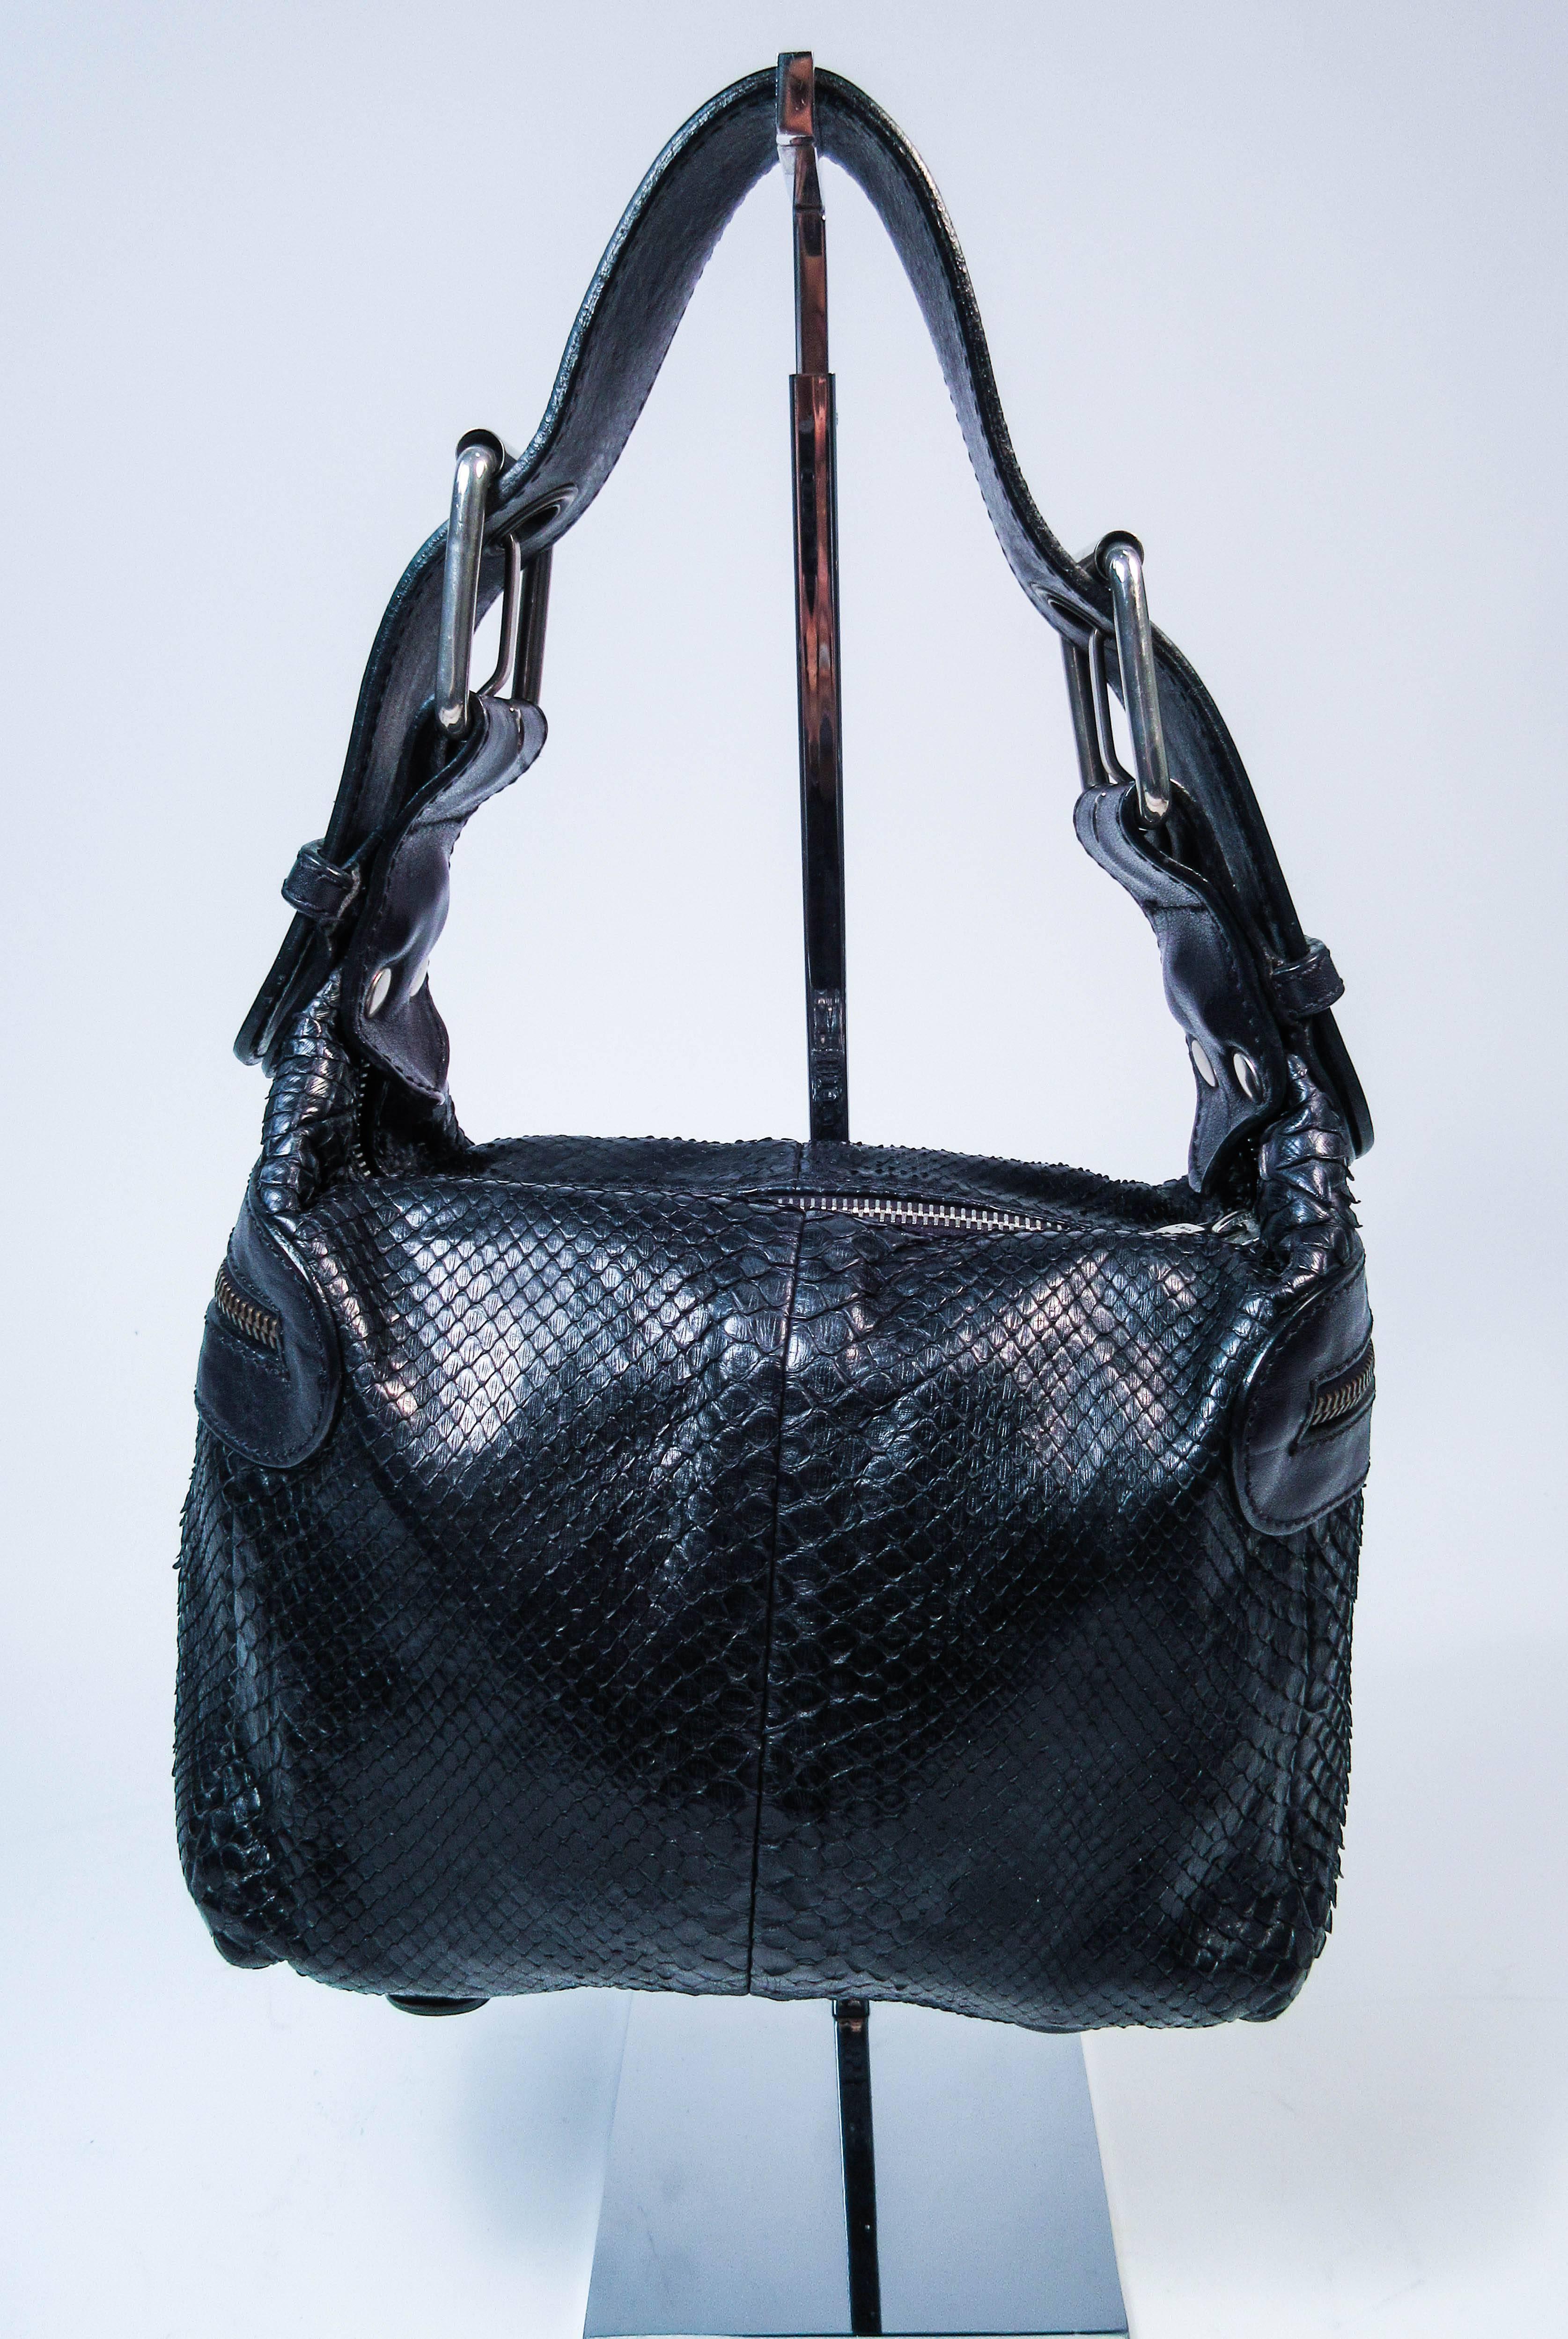 This Chloe purse is composed of black python skin and features a top handle with buckle accenting. There are two exterior zipper compartments and one interior zipper compartment. In excellent pre-owned condition (some signs of wear due to